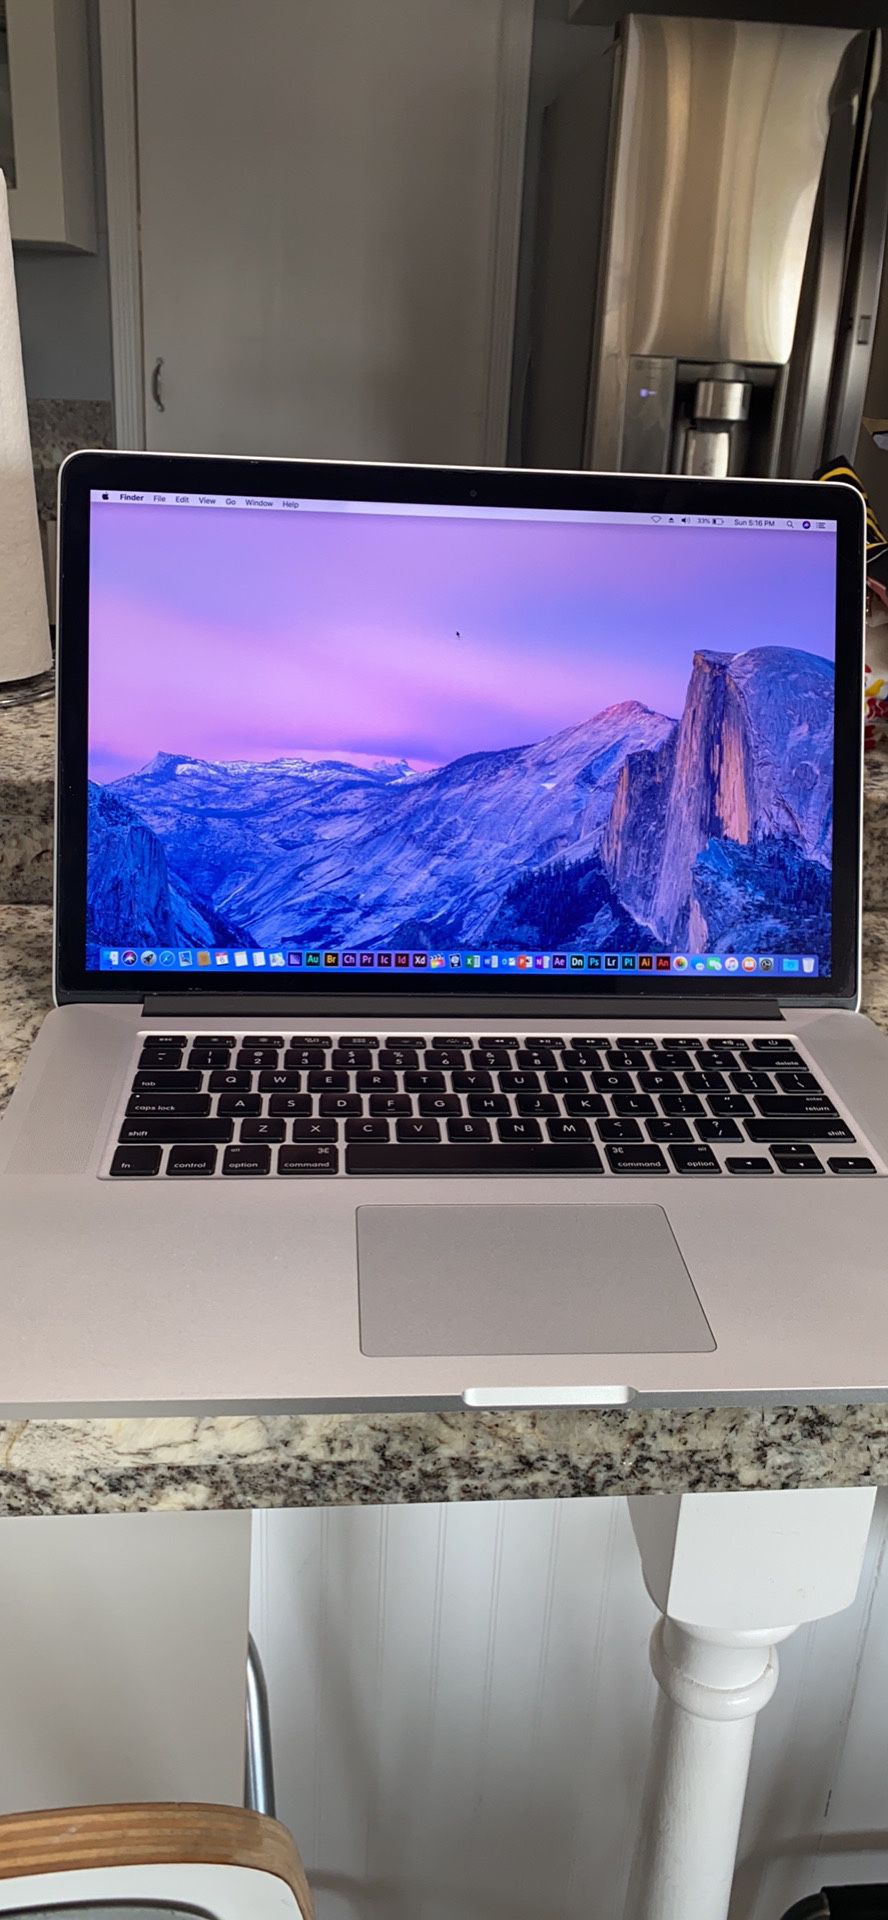 APPLE MACBOOK PRO 15” INTEL CORE i7 @ 2.4GHZ 16GB RAM 256GB SSD! 2 GRAPHICS CARDS! LOADED WITH PROGRAMS!!